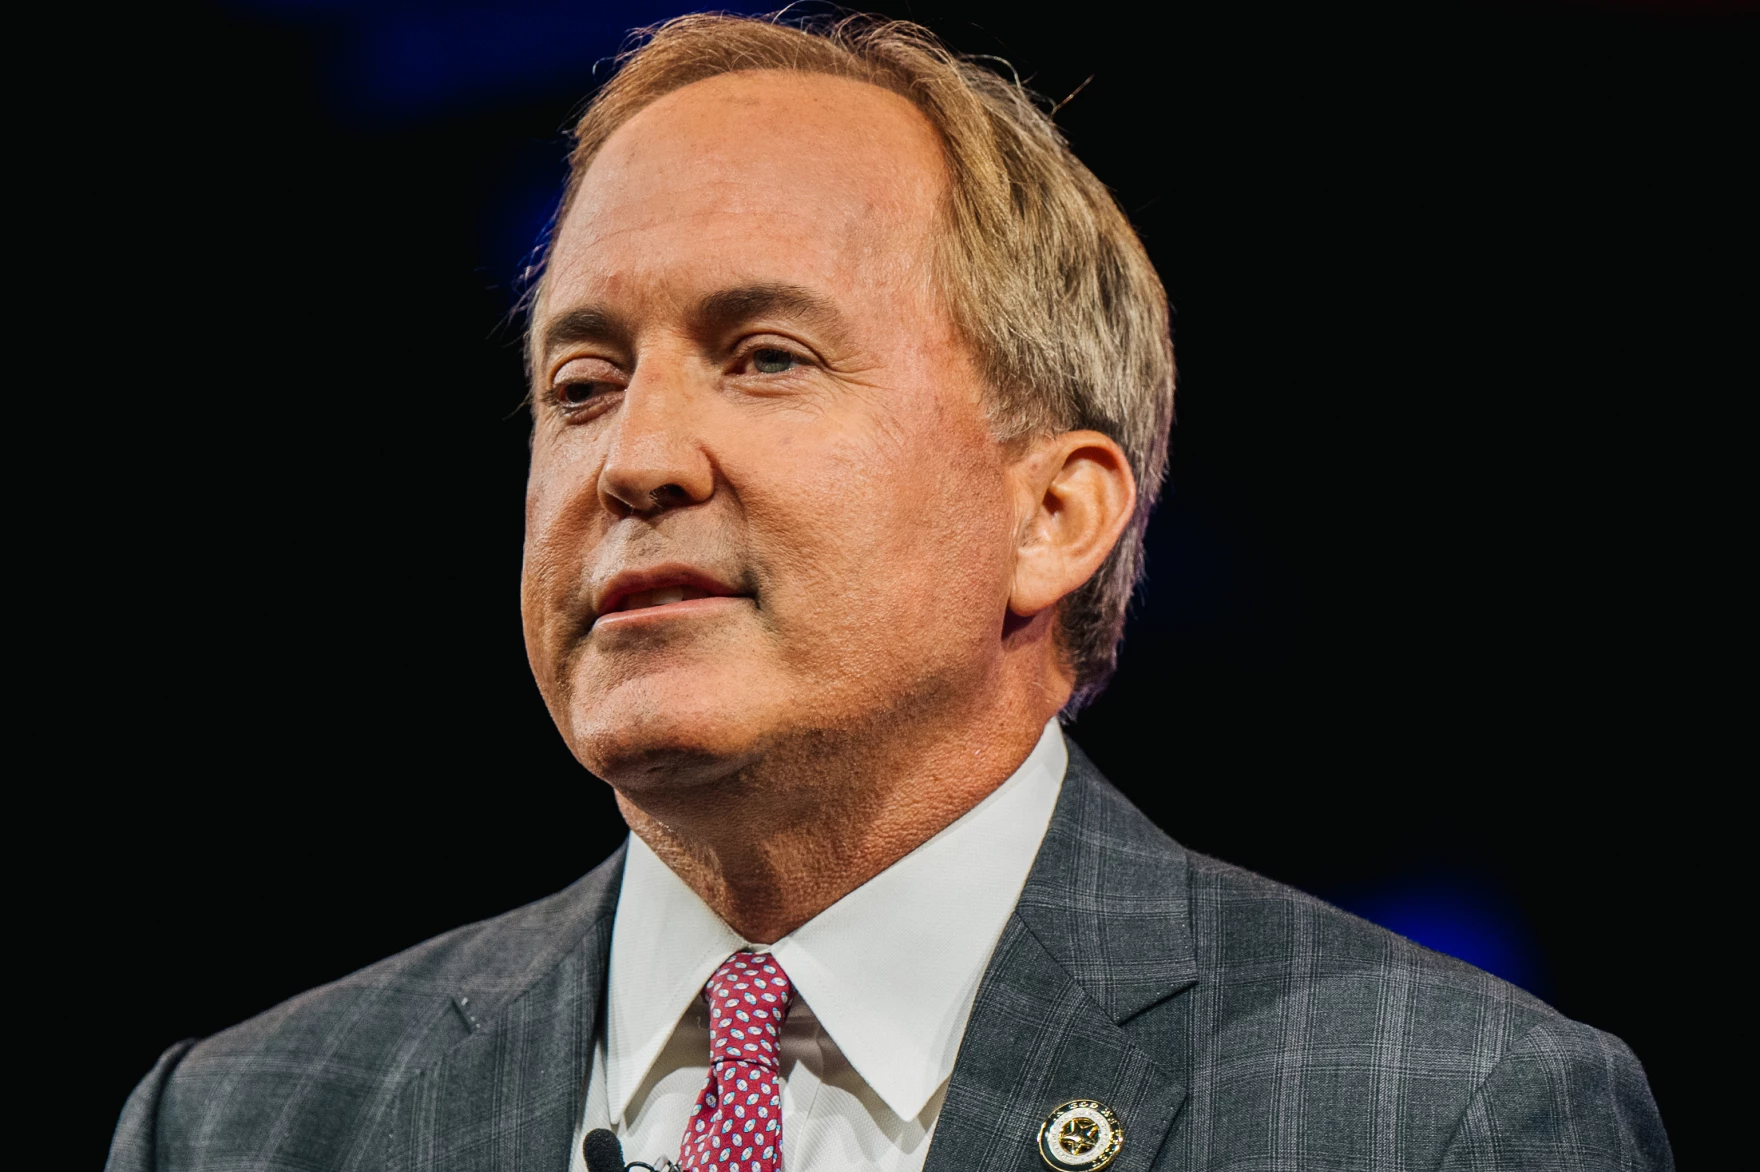 Attorney General Paxton Responds to the “Illegal, Unfounded, and Unethical Impeachment” by the Texas House RINOs